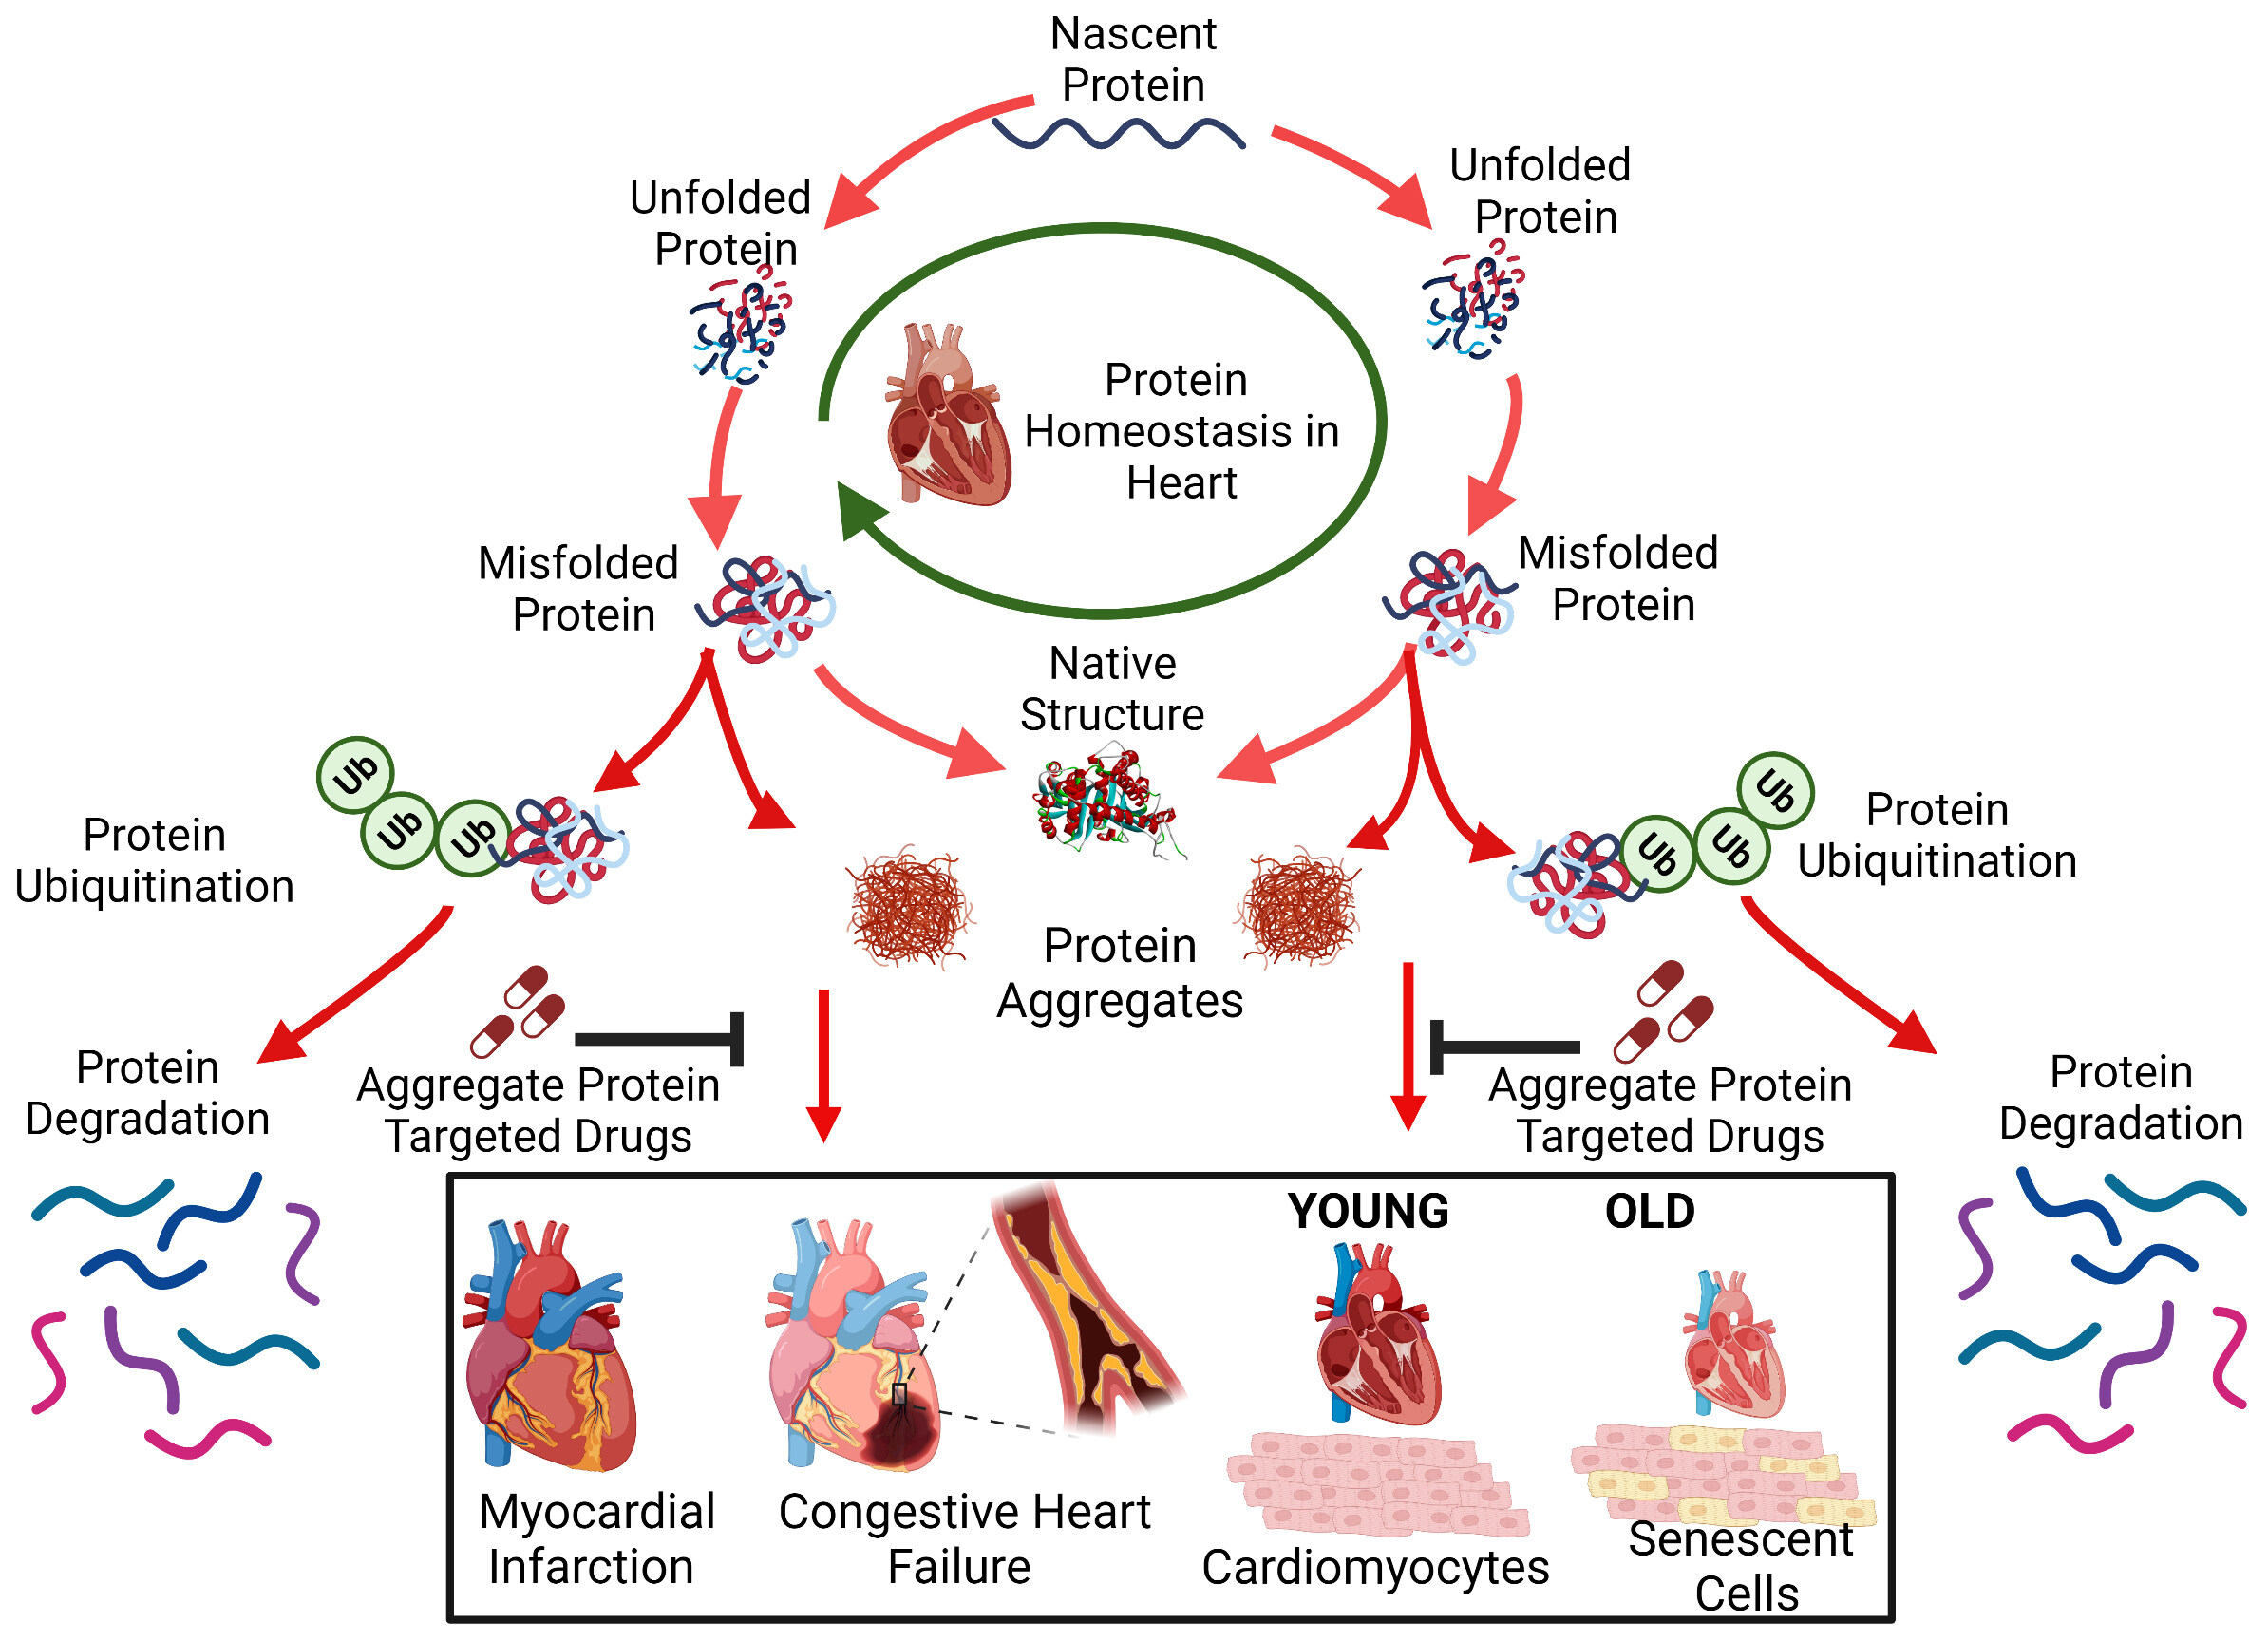 Protein homeostasis in the aged and diseased heart